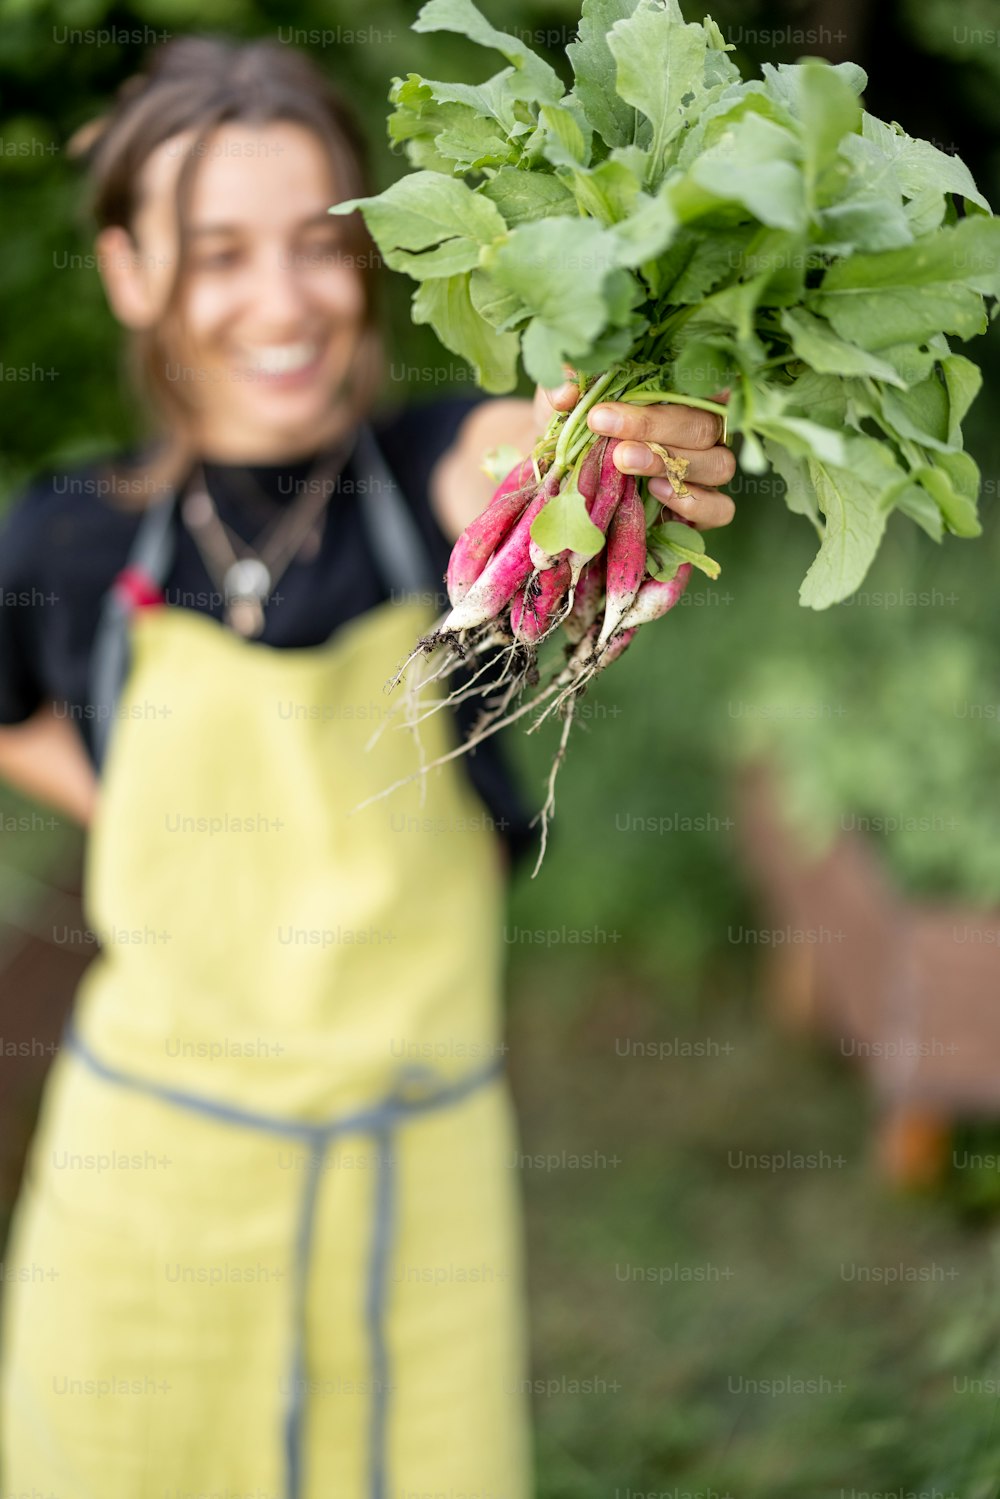 Woman holding fresh radish in hands from home urban garden. Healthy organic food, vegetables, harvest. Sustainable farming. Focus on radish.